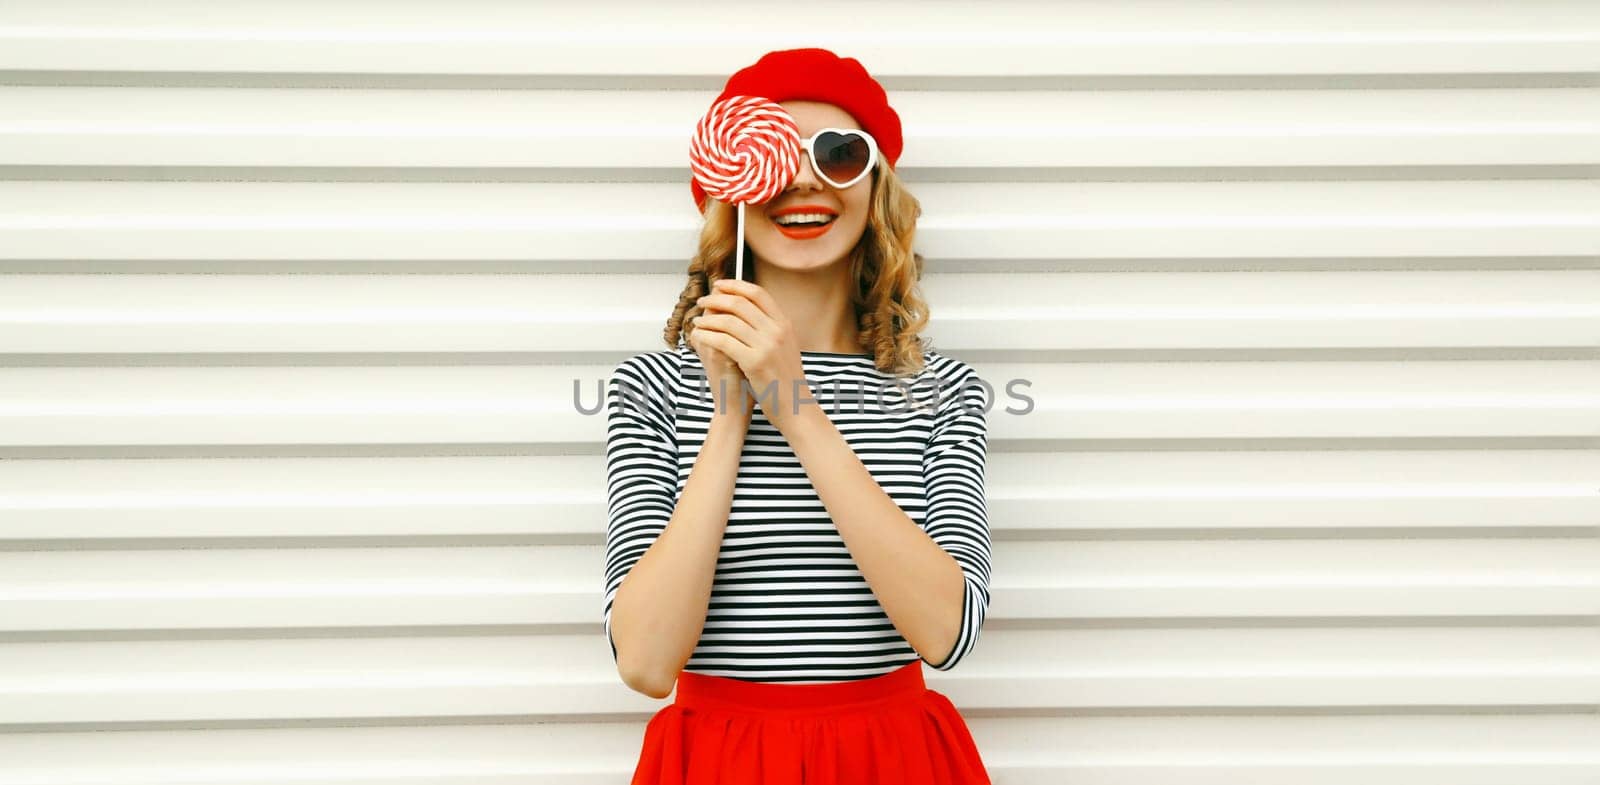 Portrait of happy cheerful smiling young woman holding colorful lollipop wearing white sunglasses, red beret hat on white background